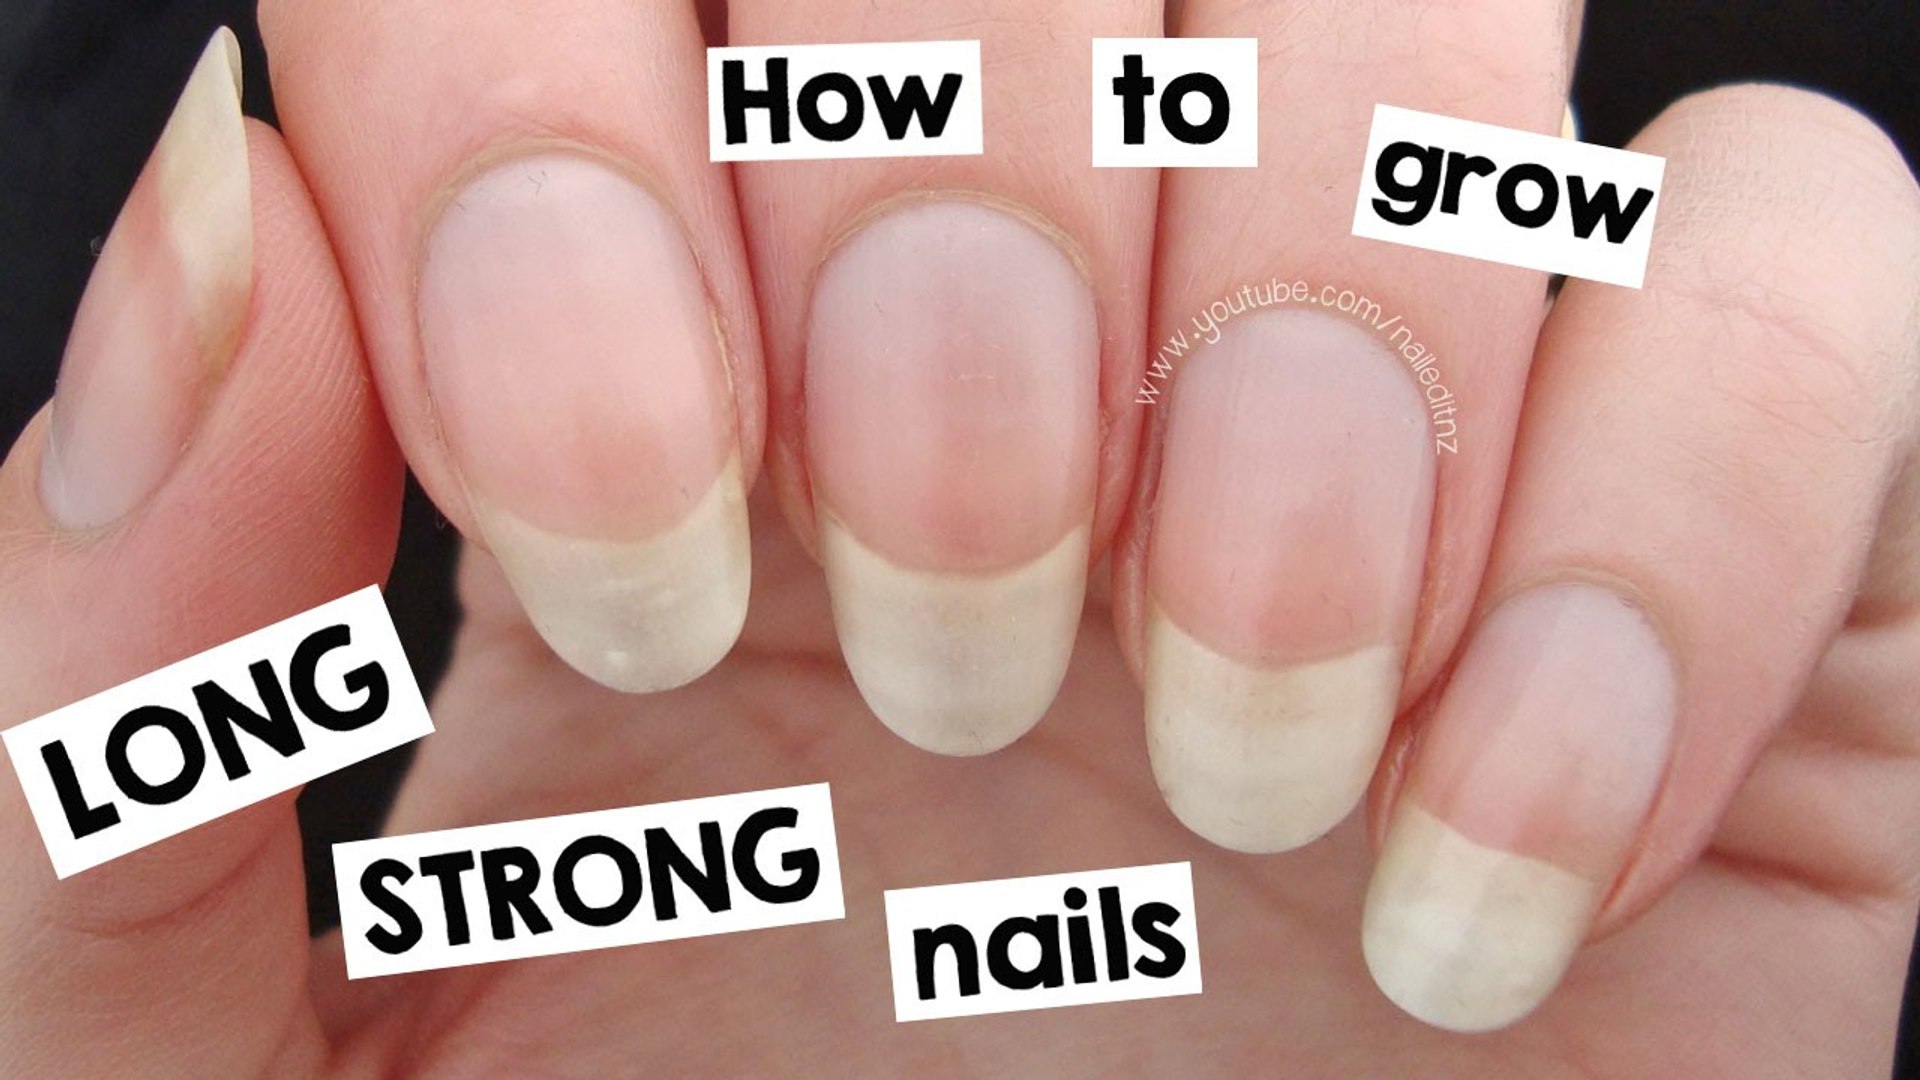 How to Grow Nails Faster Naturally - How to grow stronger nails